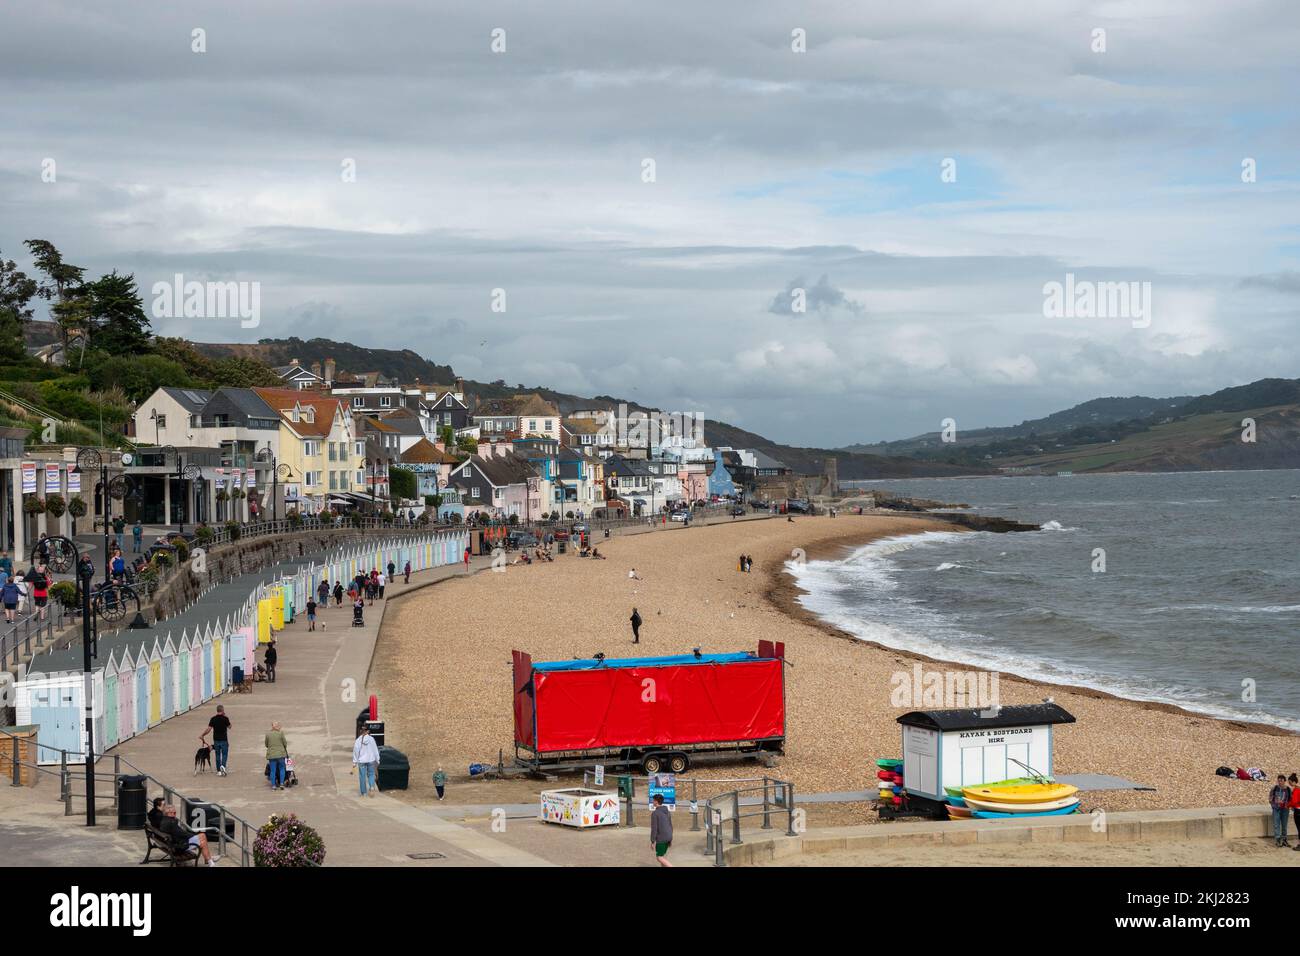 view of beach huts beach and traditional cottages in the historic seaside town of Lyme Regis also known as The Pearl of Dorset Stock Photo